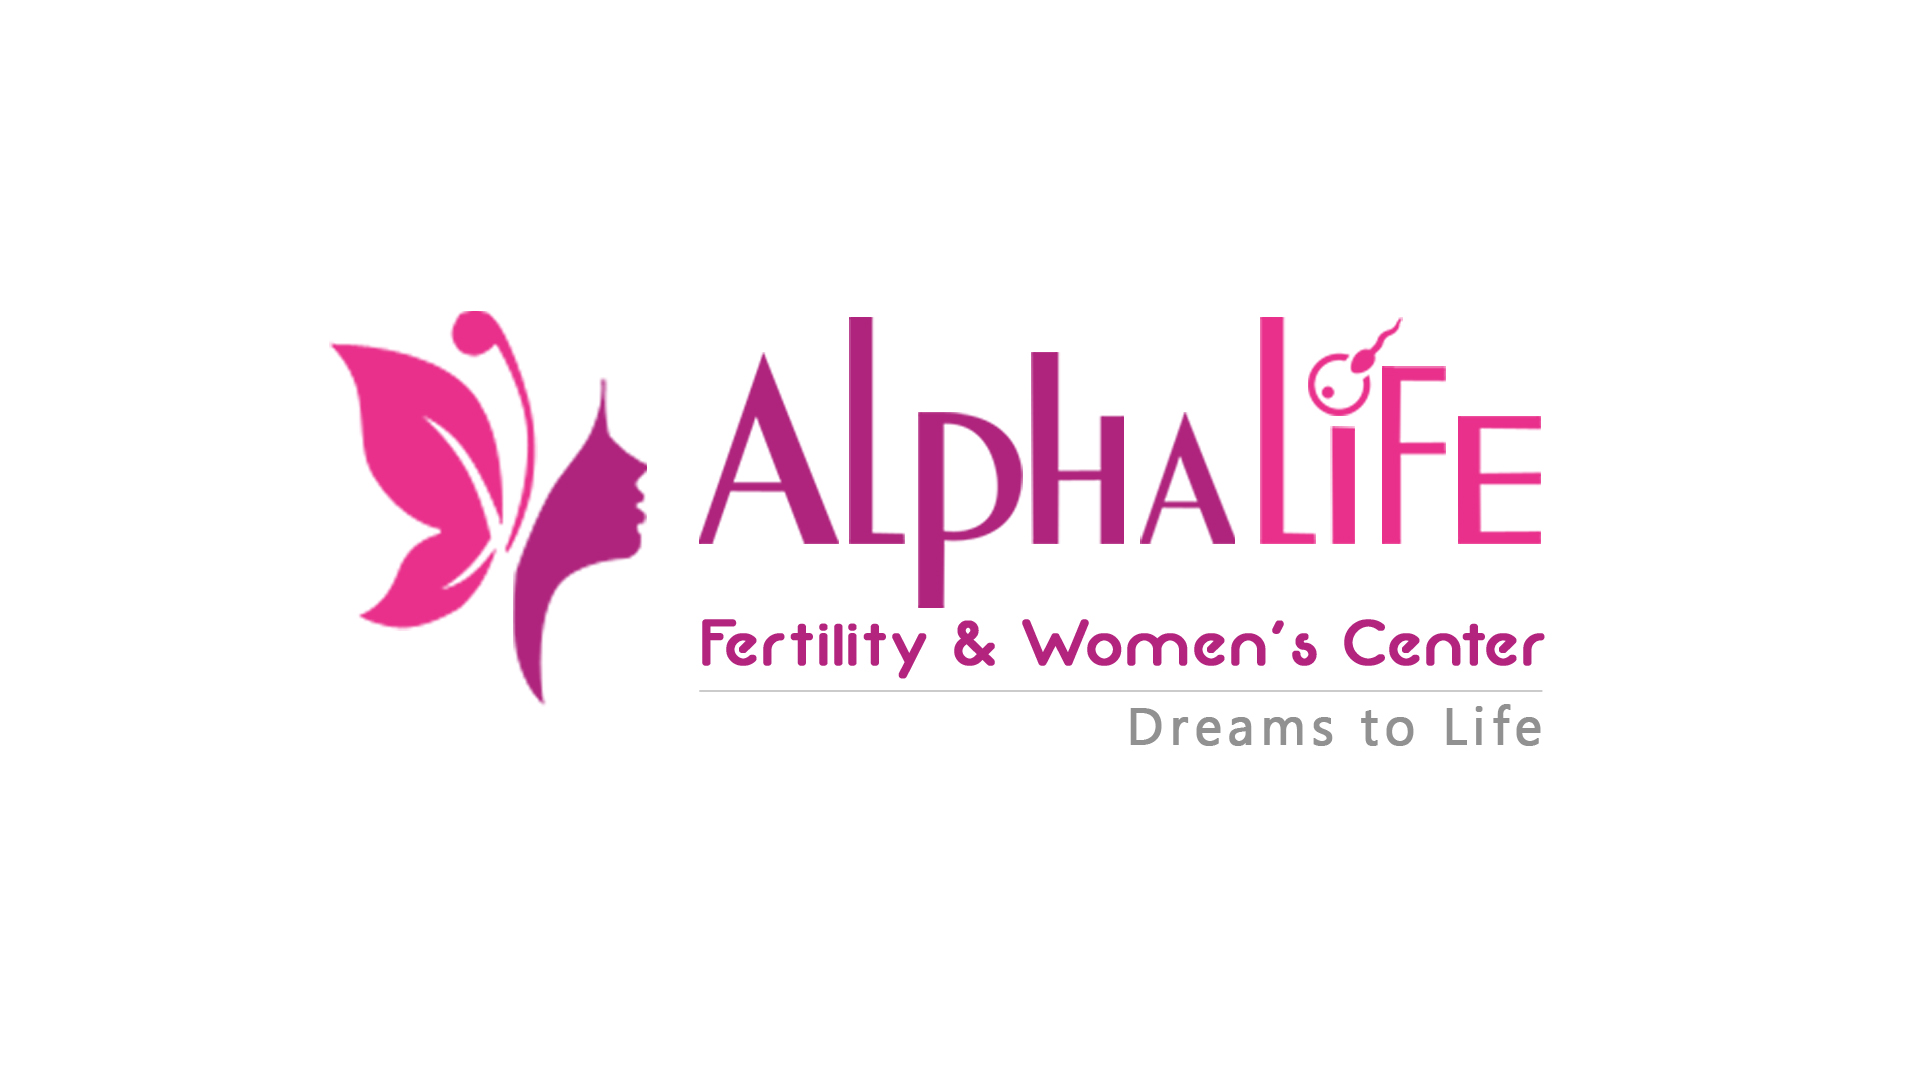 AlphaLife Fertility and Women's Center|Hospitals|Medical Services